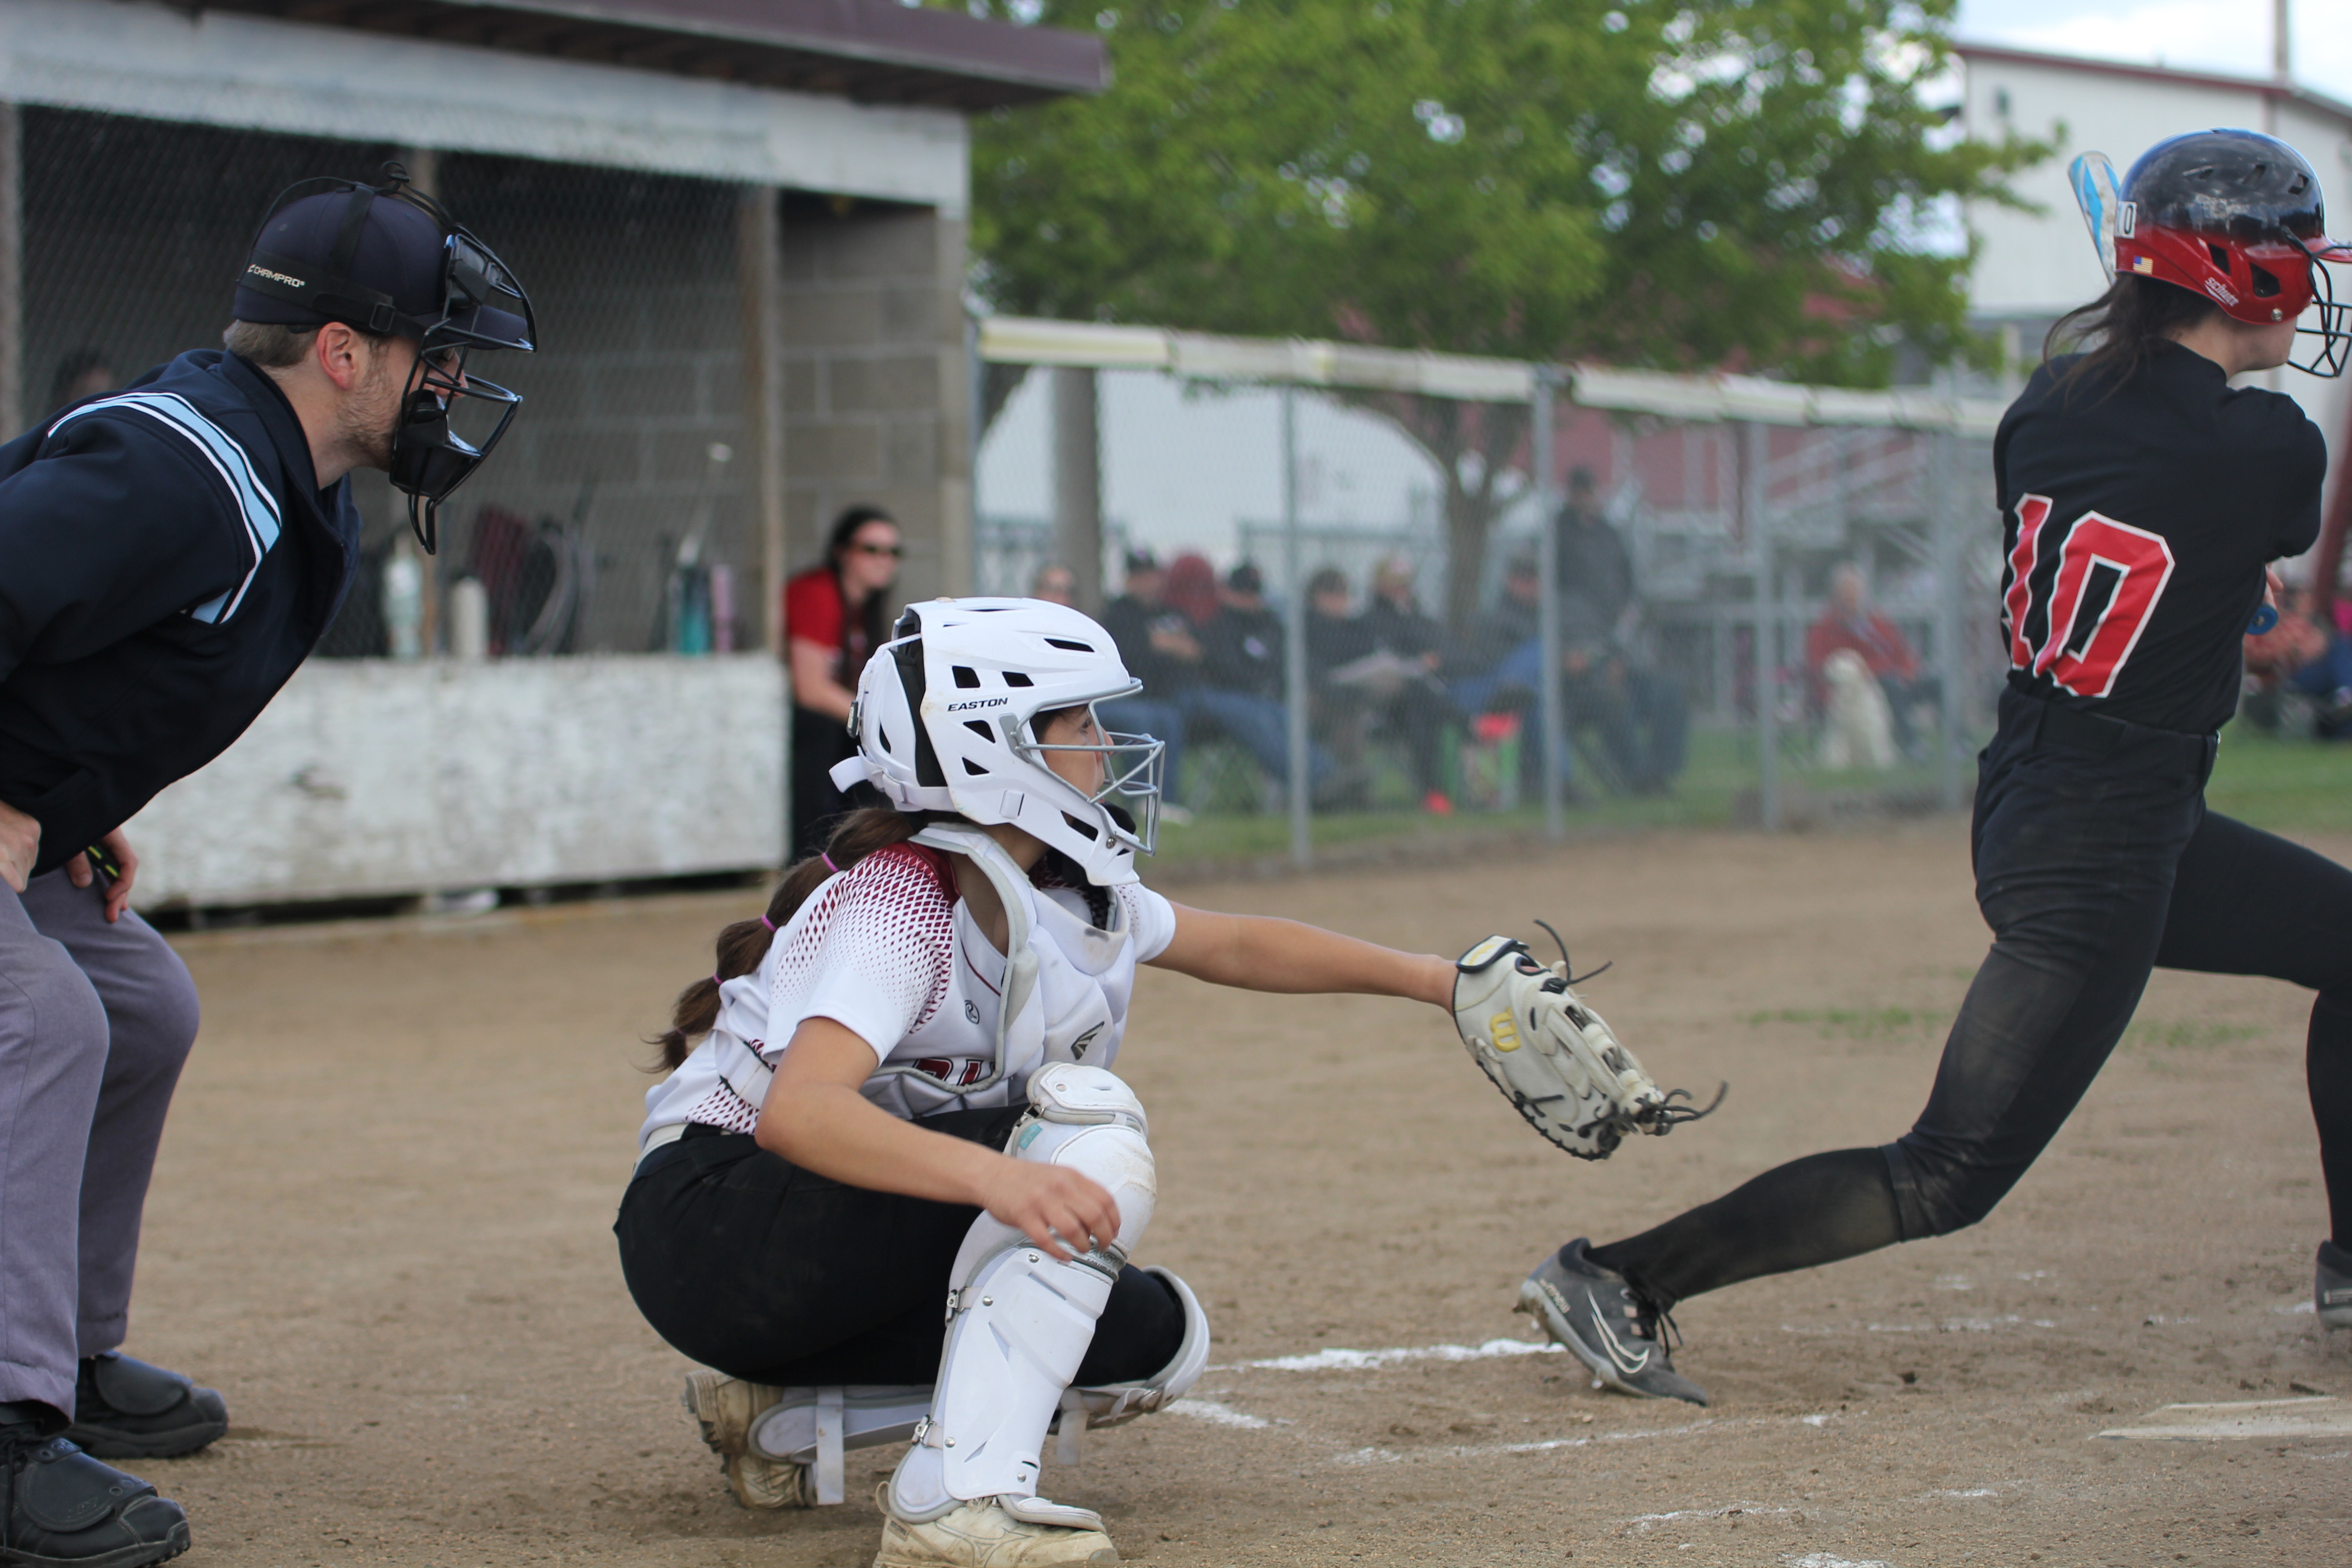 softball player in position to catch ball